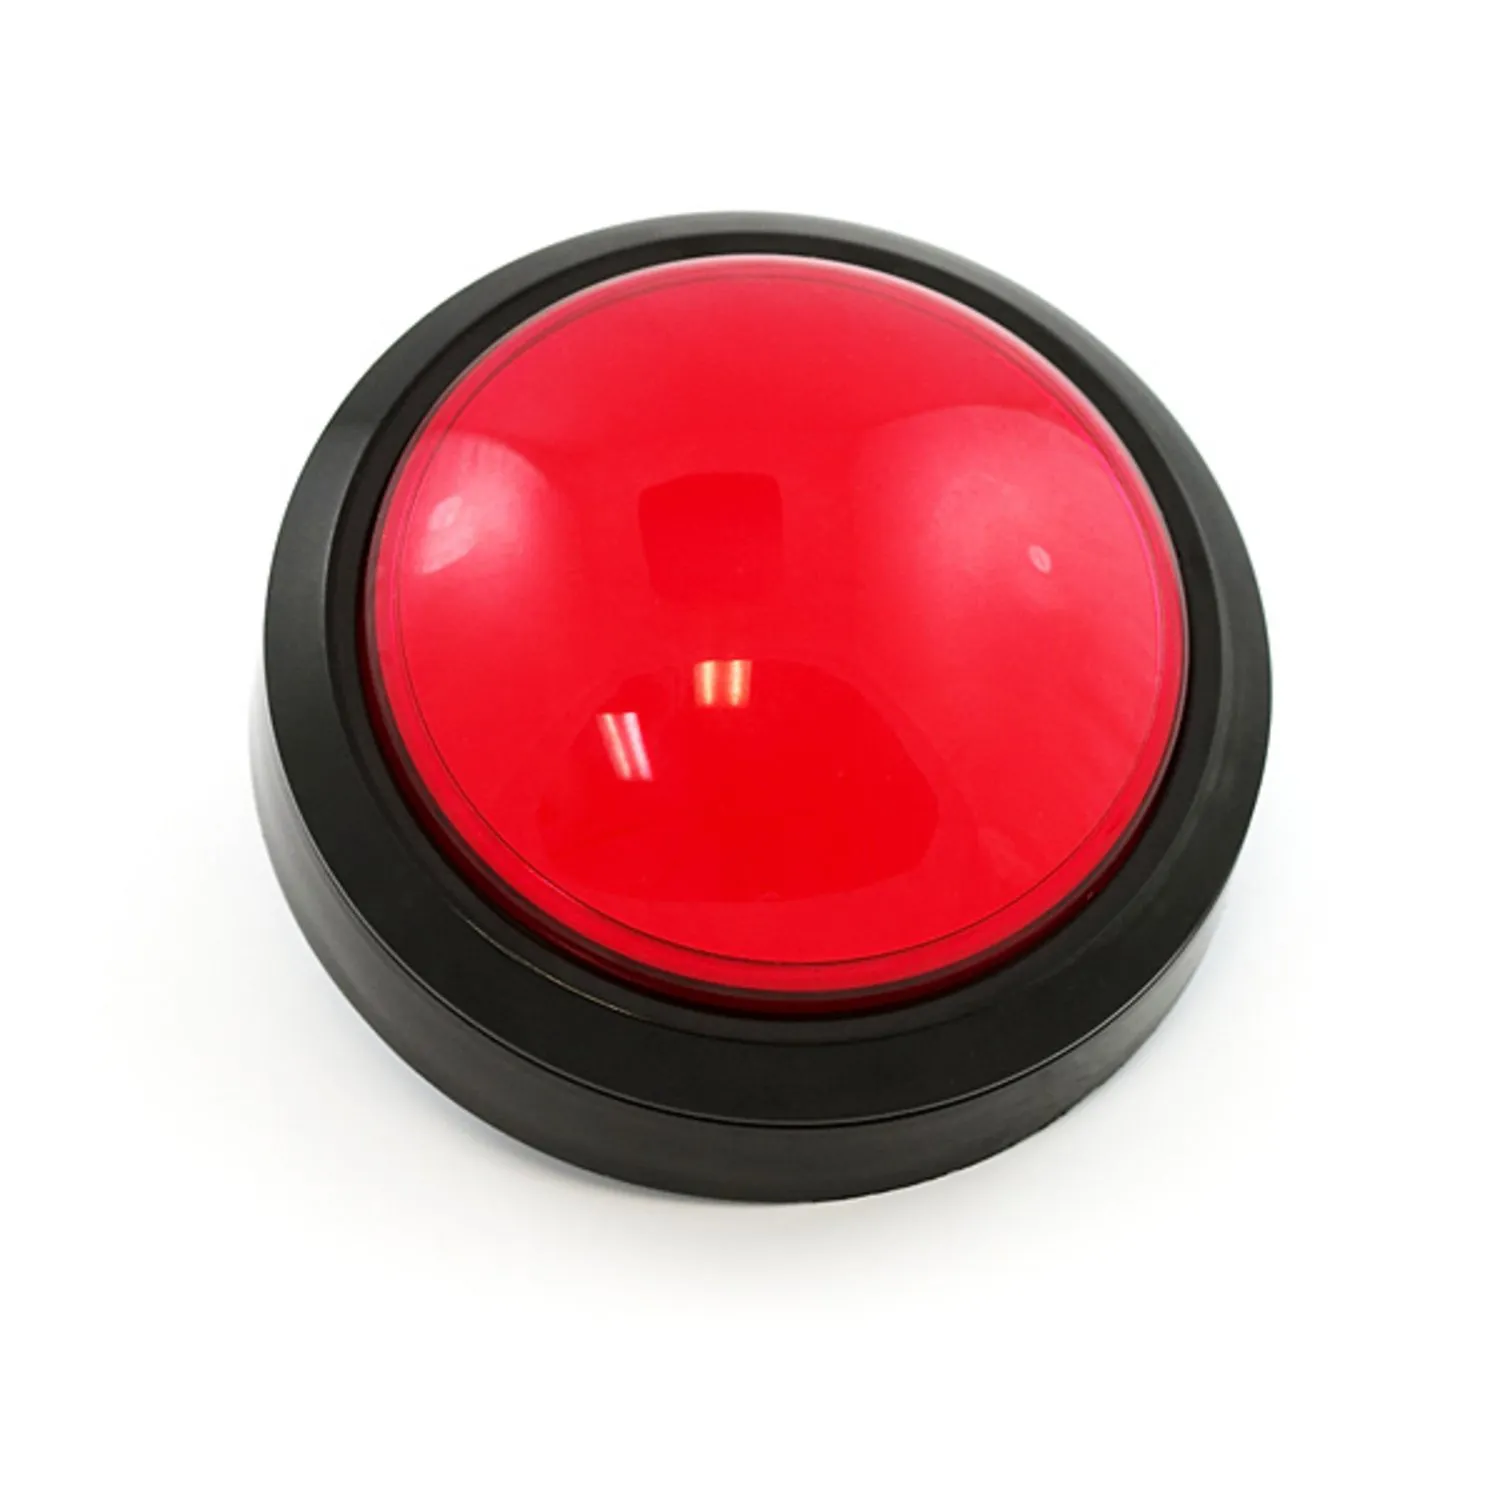 Photo of Big Dome Pushbutton - Red